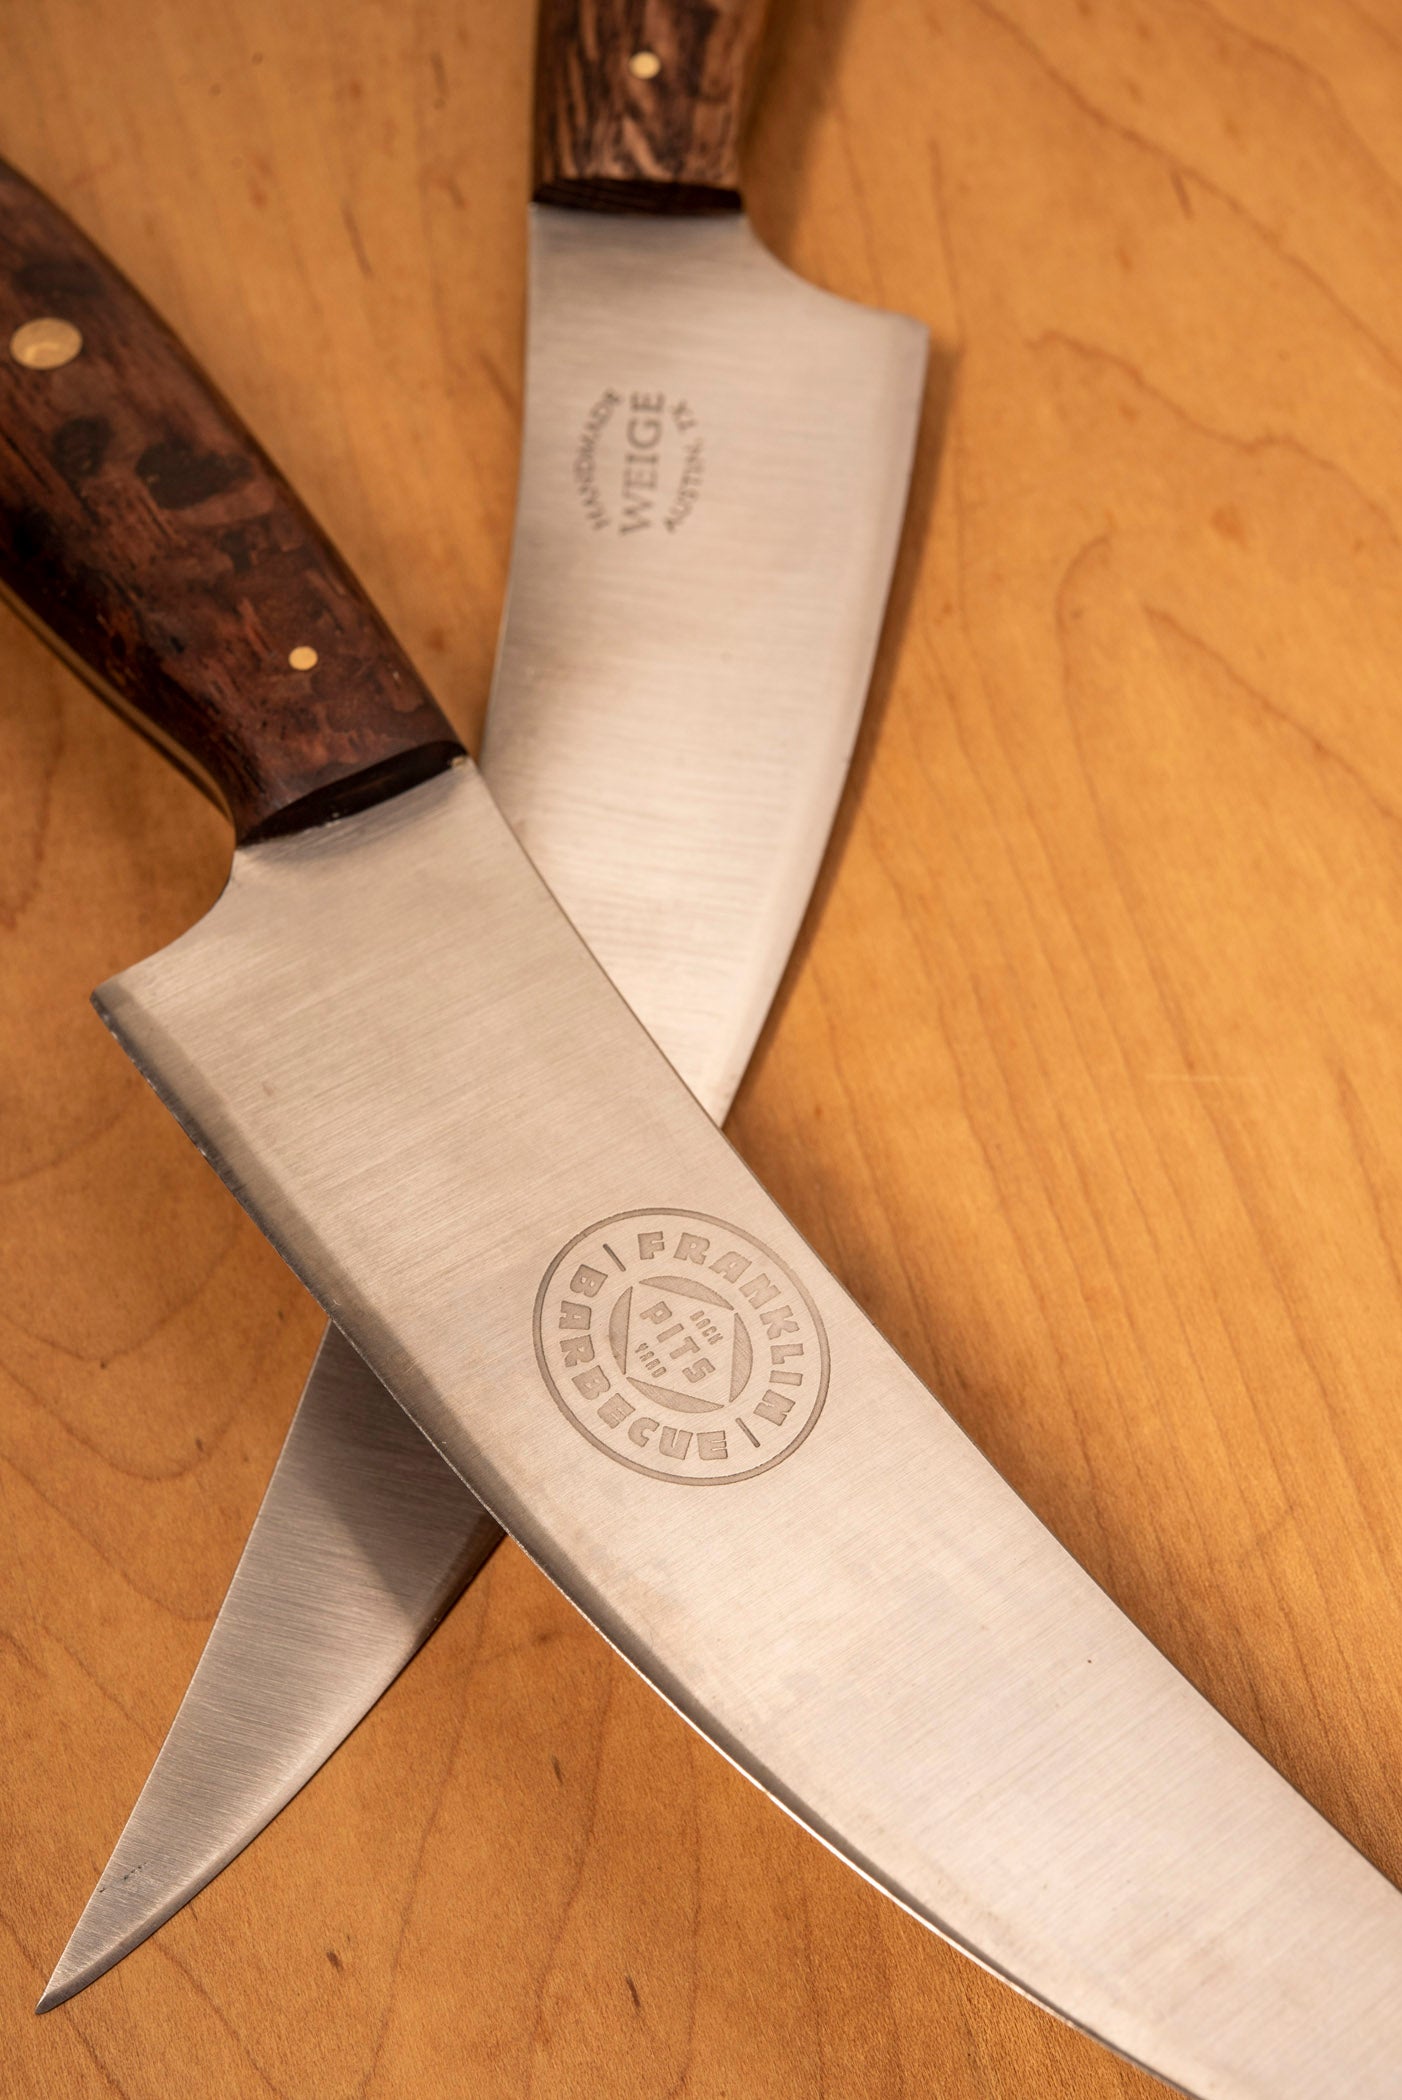 Two Franklin Barbecue Pits Weige Trimming Knives laid criss-crossed 